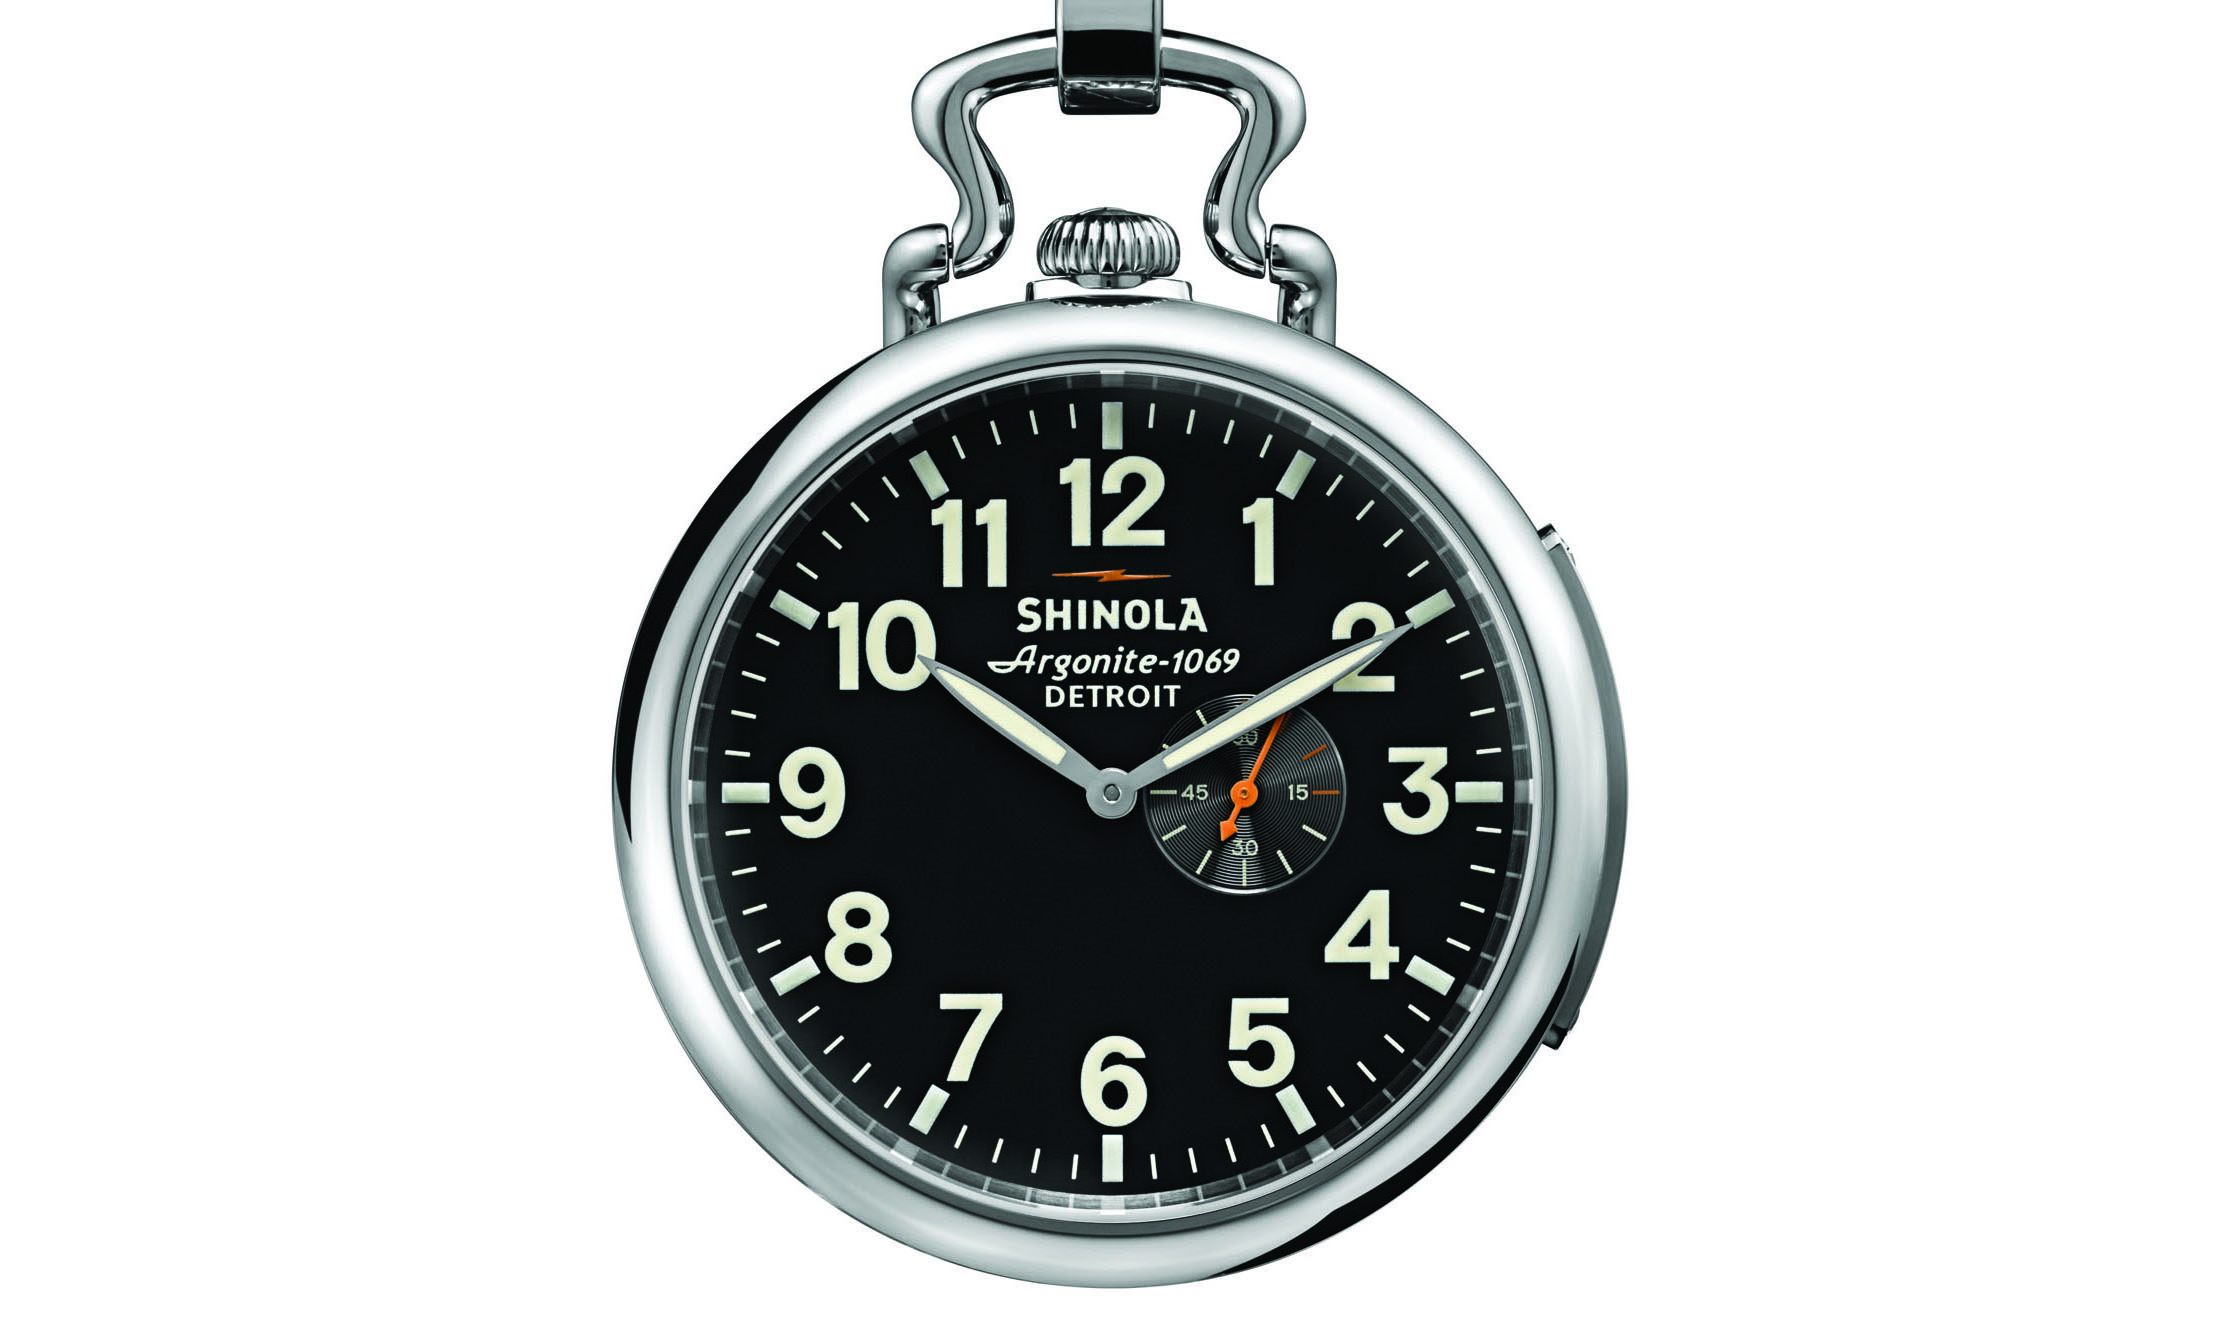 Tom Ford And Shinola Announce New Swiss-Made Brand Of Wristwatches